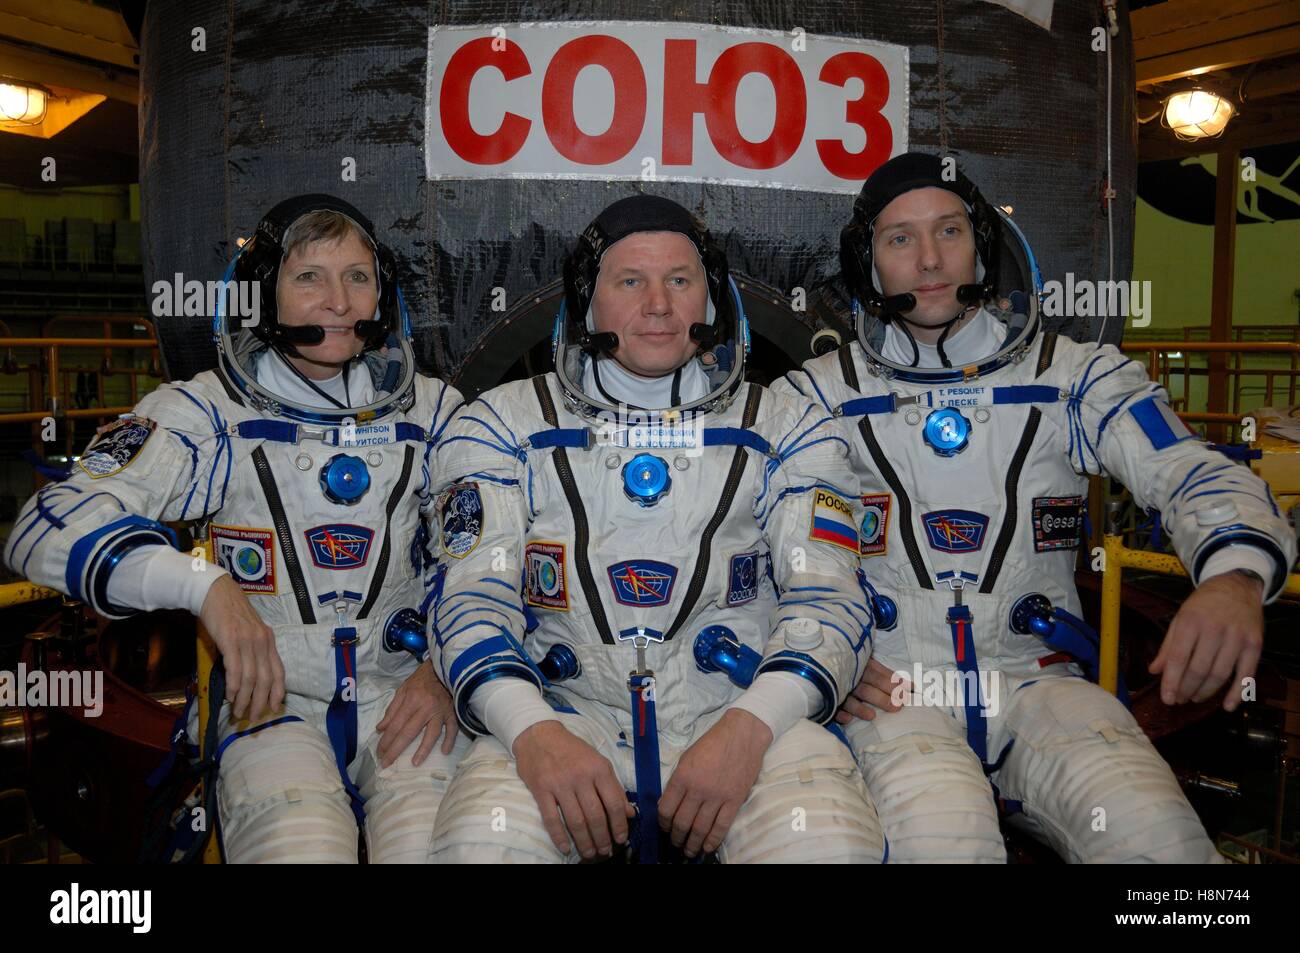 NASA International Space Station Expedition 50-51 prime crew members (left to right) astronaut Peggy Whitson, Russian cosmonaut Oleg Novitskiy of Roscosmos, and astronaut Thomas Pesquet of the European Space Agency pose in front of the Soyuz MS-03 spacecraft during a fit check dress rehearsal at the Baikonur Cosmodrome Integration Facility November 2, 2016 in Baikonur, Kazakhstan. Stock Photo